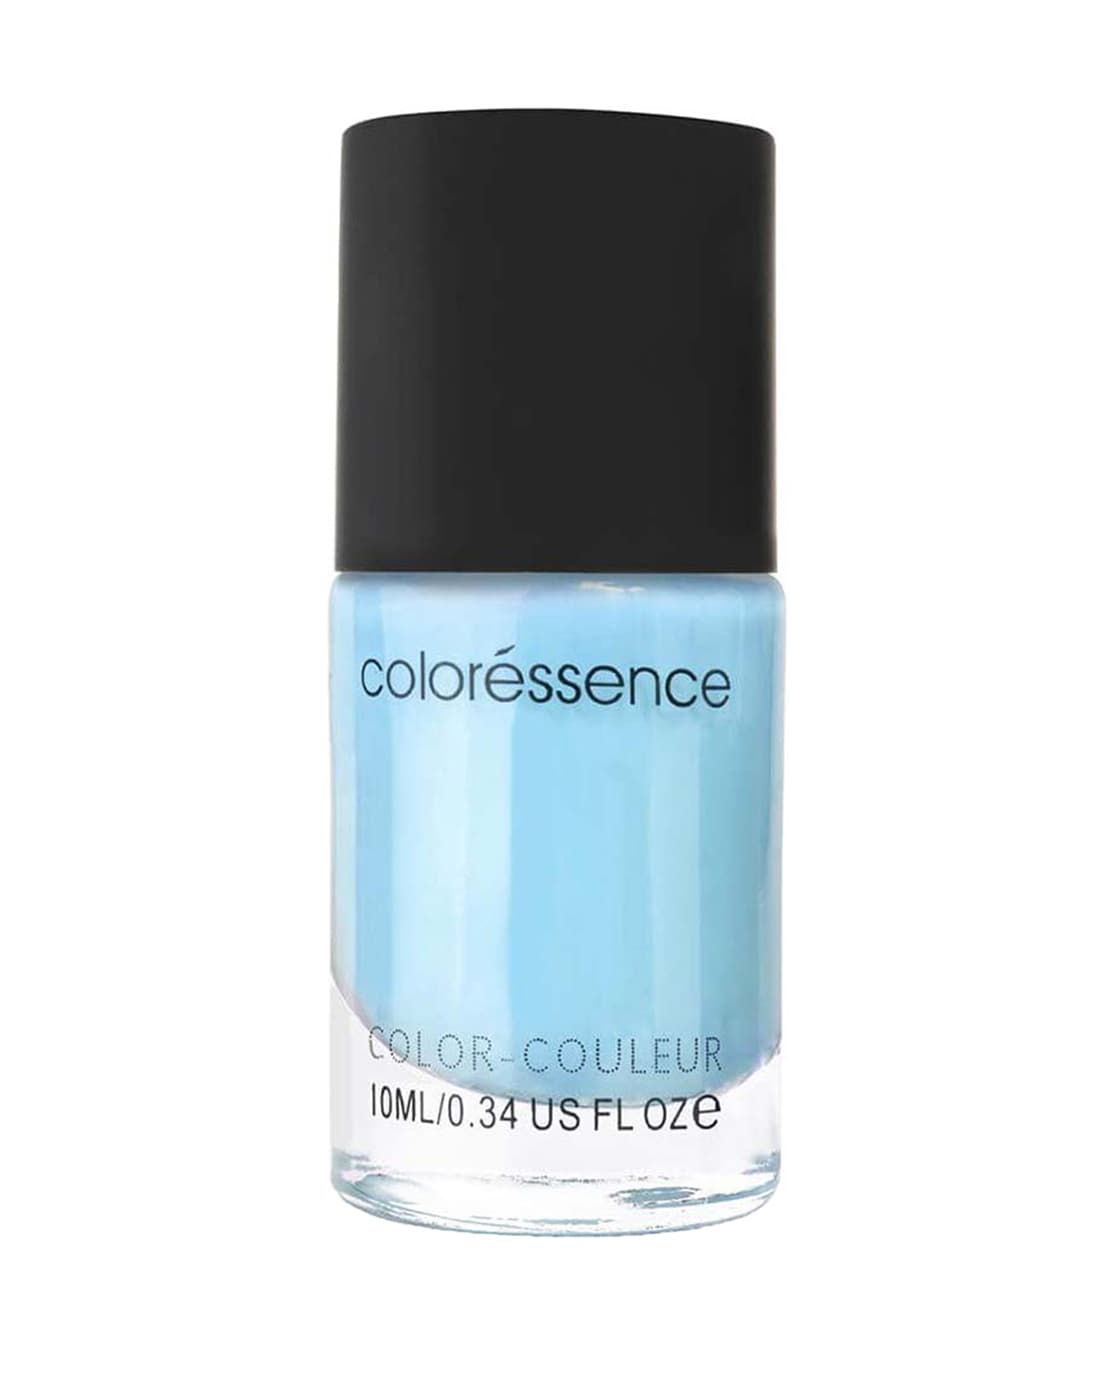 Coloressence on X: 